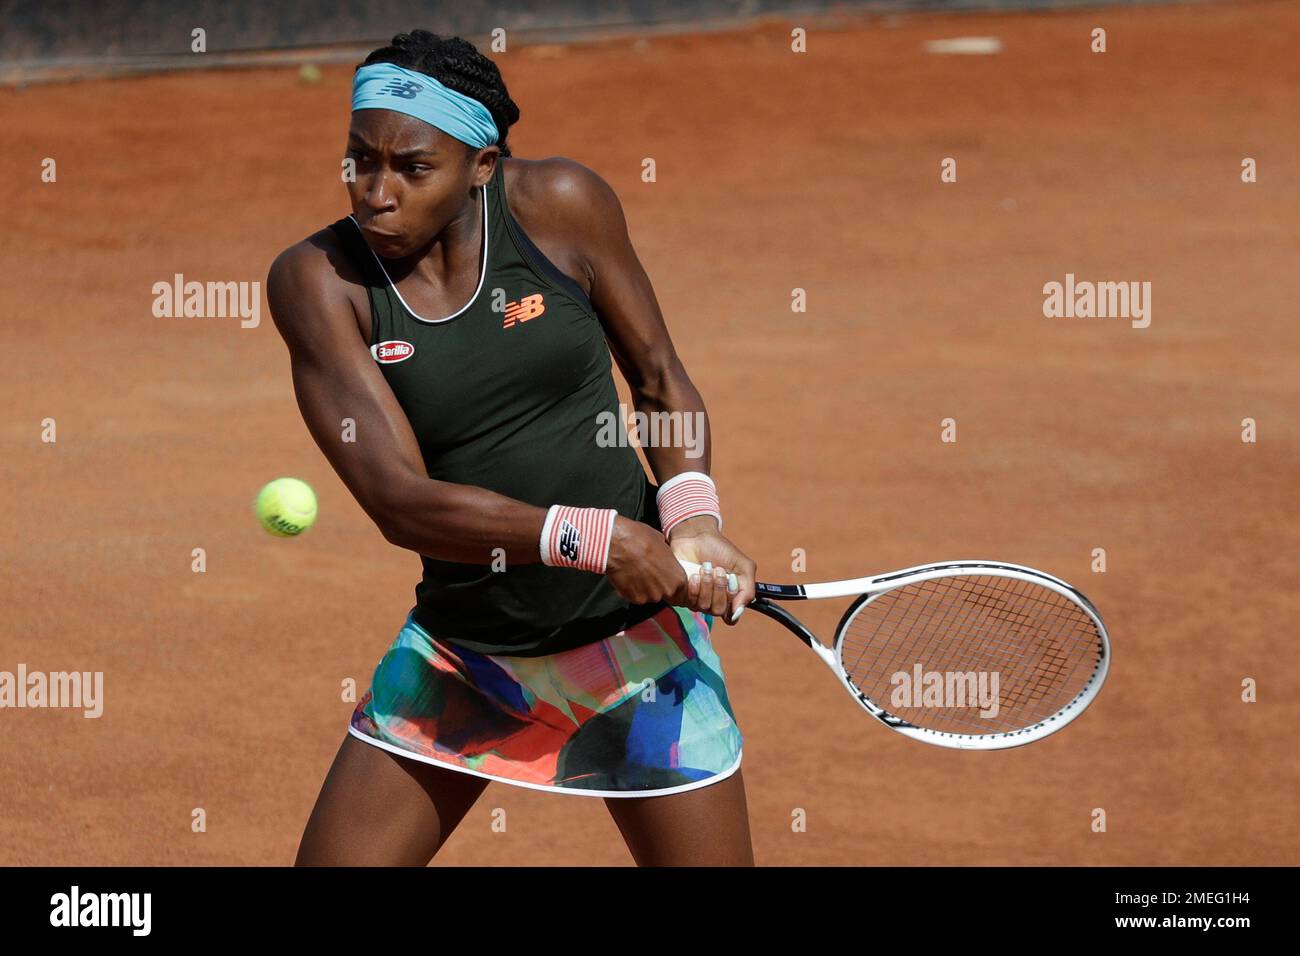 Cori Gauff, of the United States, returns the ball to Polands Iga Swiatek during their semi-final match at the Italian Open tennis tournament, in Rome, Saturday, May 15, 2021